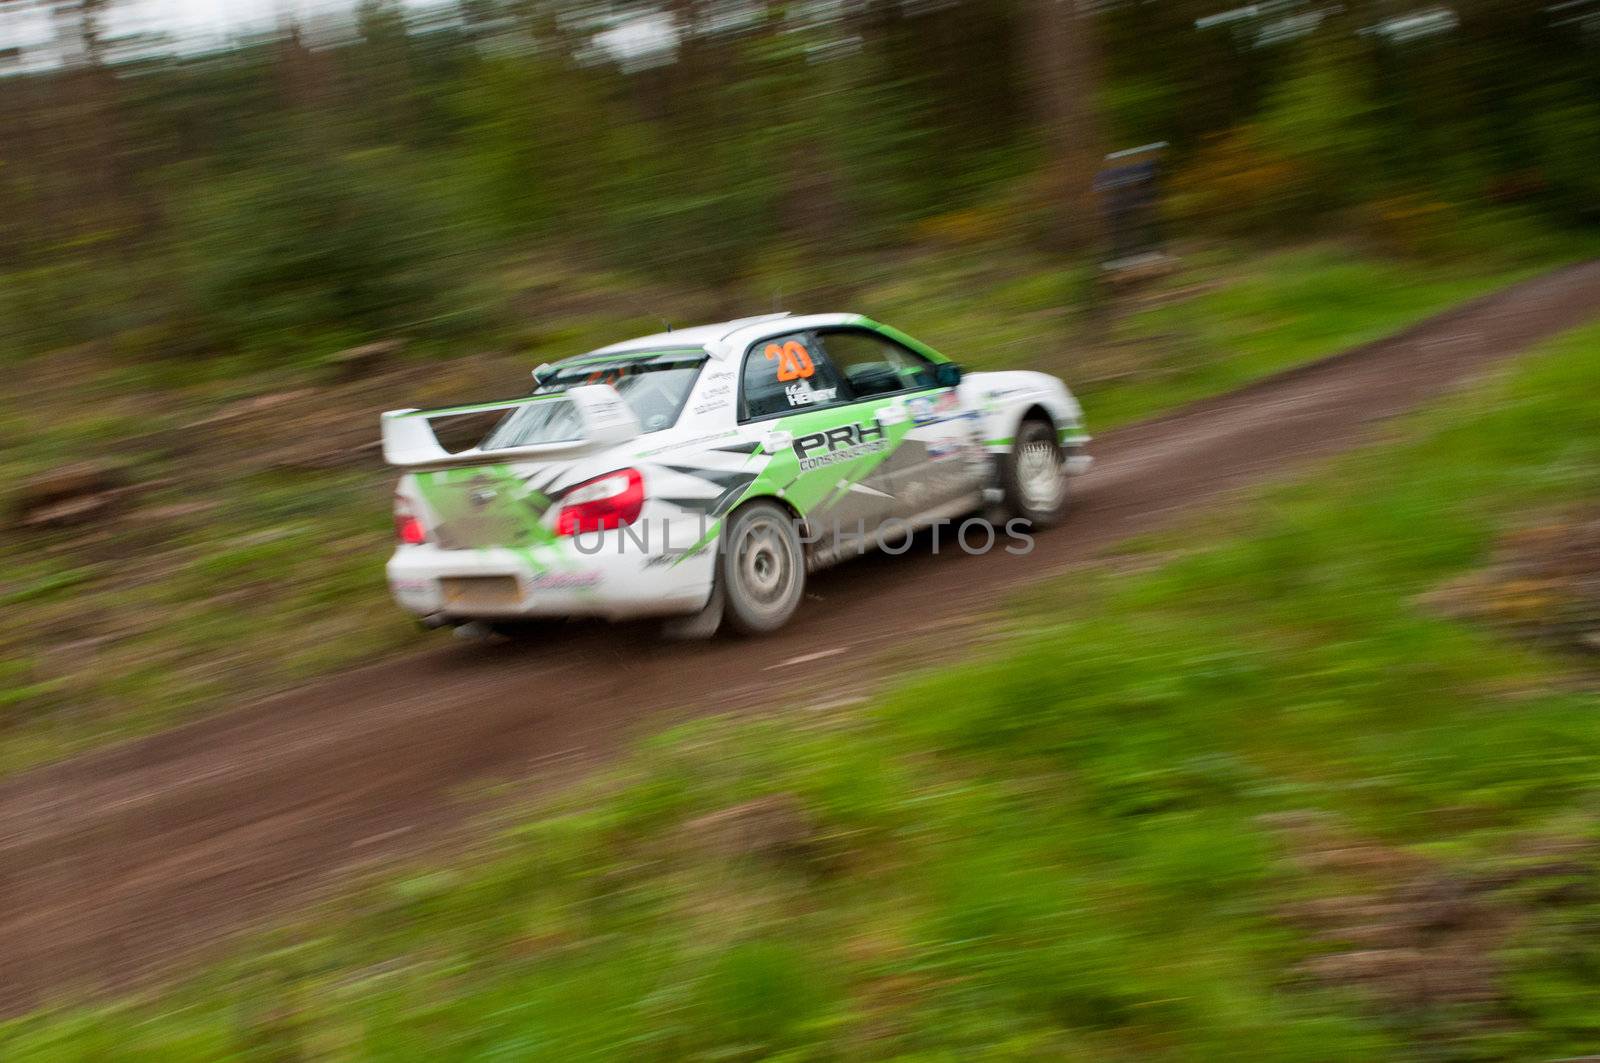 MALLOW, IRELAND - MAY 19: N. Henry driving Subaru Impreza at the Jim Walsh Cork Forest Rally on May 19, 2012 in Mallow, Ireland. 4th round of the Valvoline National Forest Rally Championship.